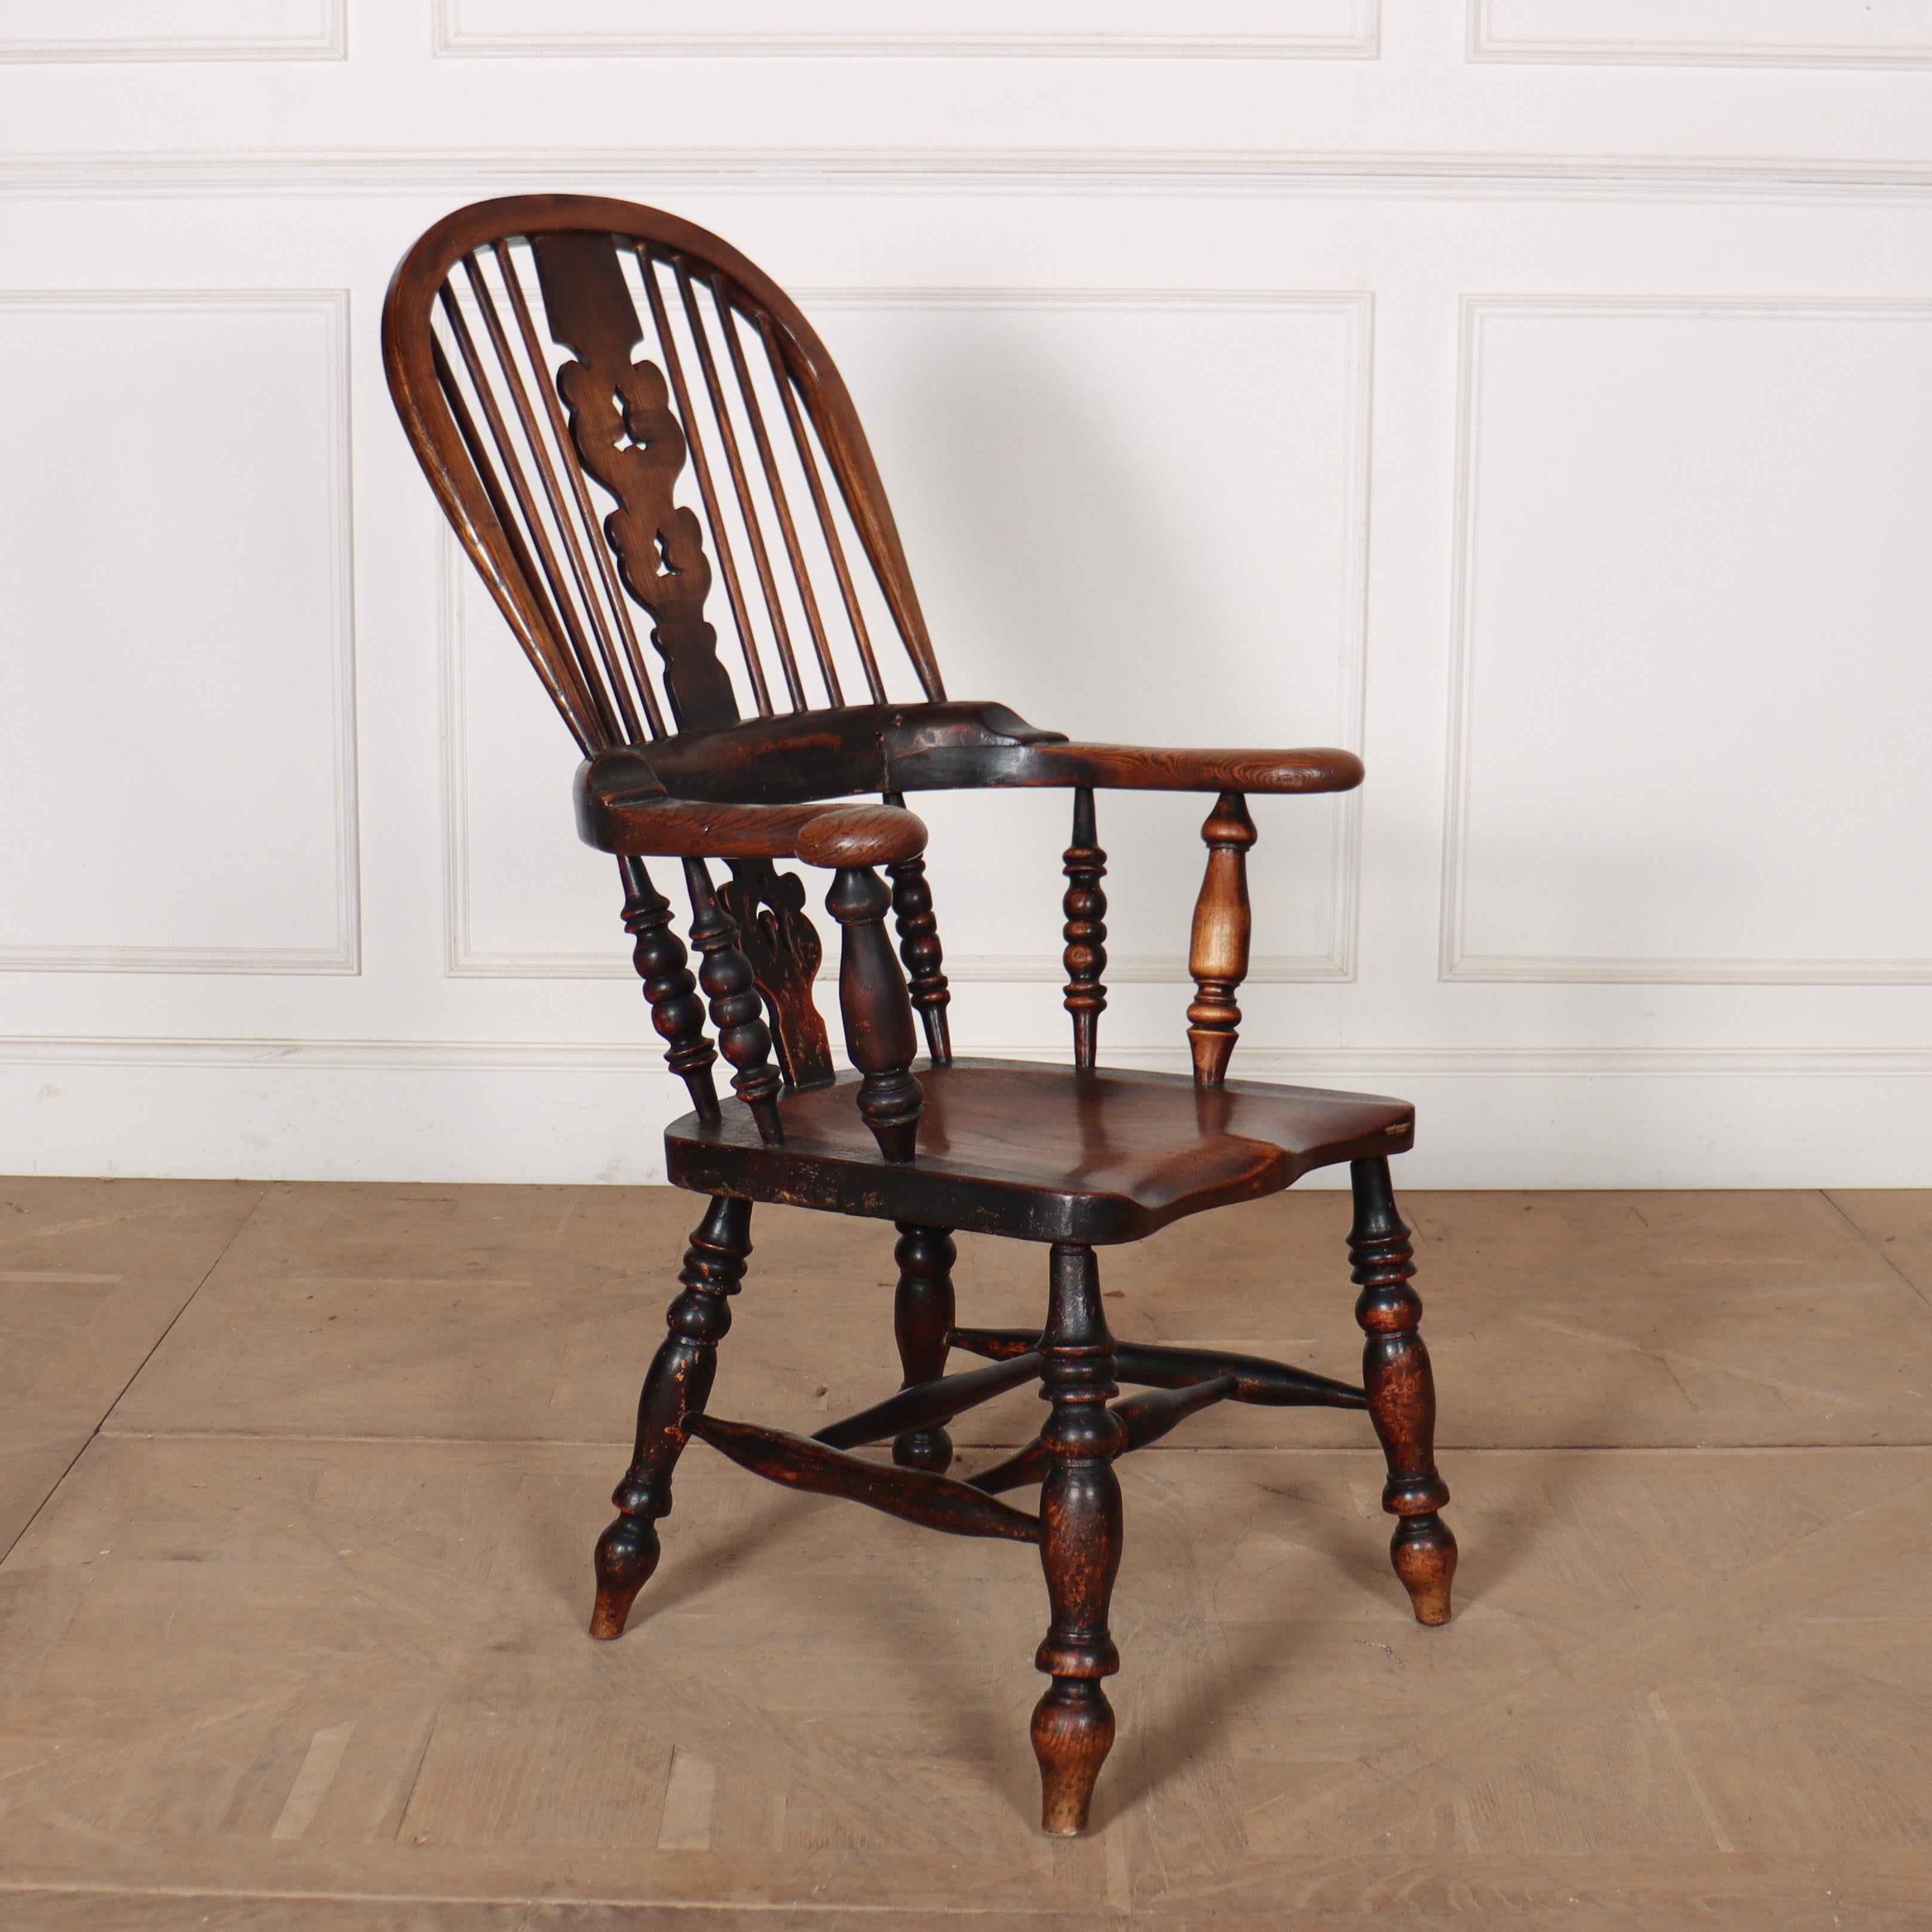 19th C Yorkshire beech and elm broad arm windsor chair. Very good colour. 1850.

Seat depth is 17 inches, seat height is 17 inches.

Reference: 8127

Dimensions
26.5 inches (67 cms) Wide
29 inches (74 cms) Deep
44.5 inches (113 cms) High